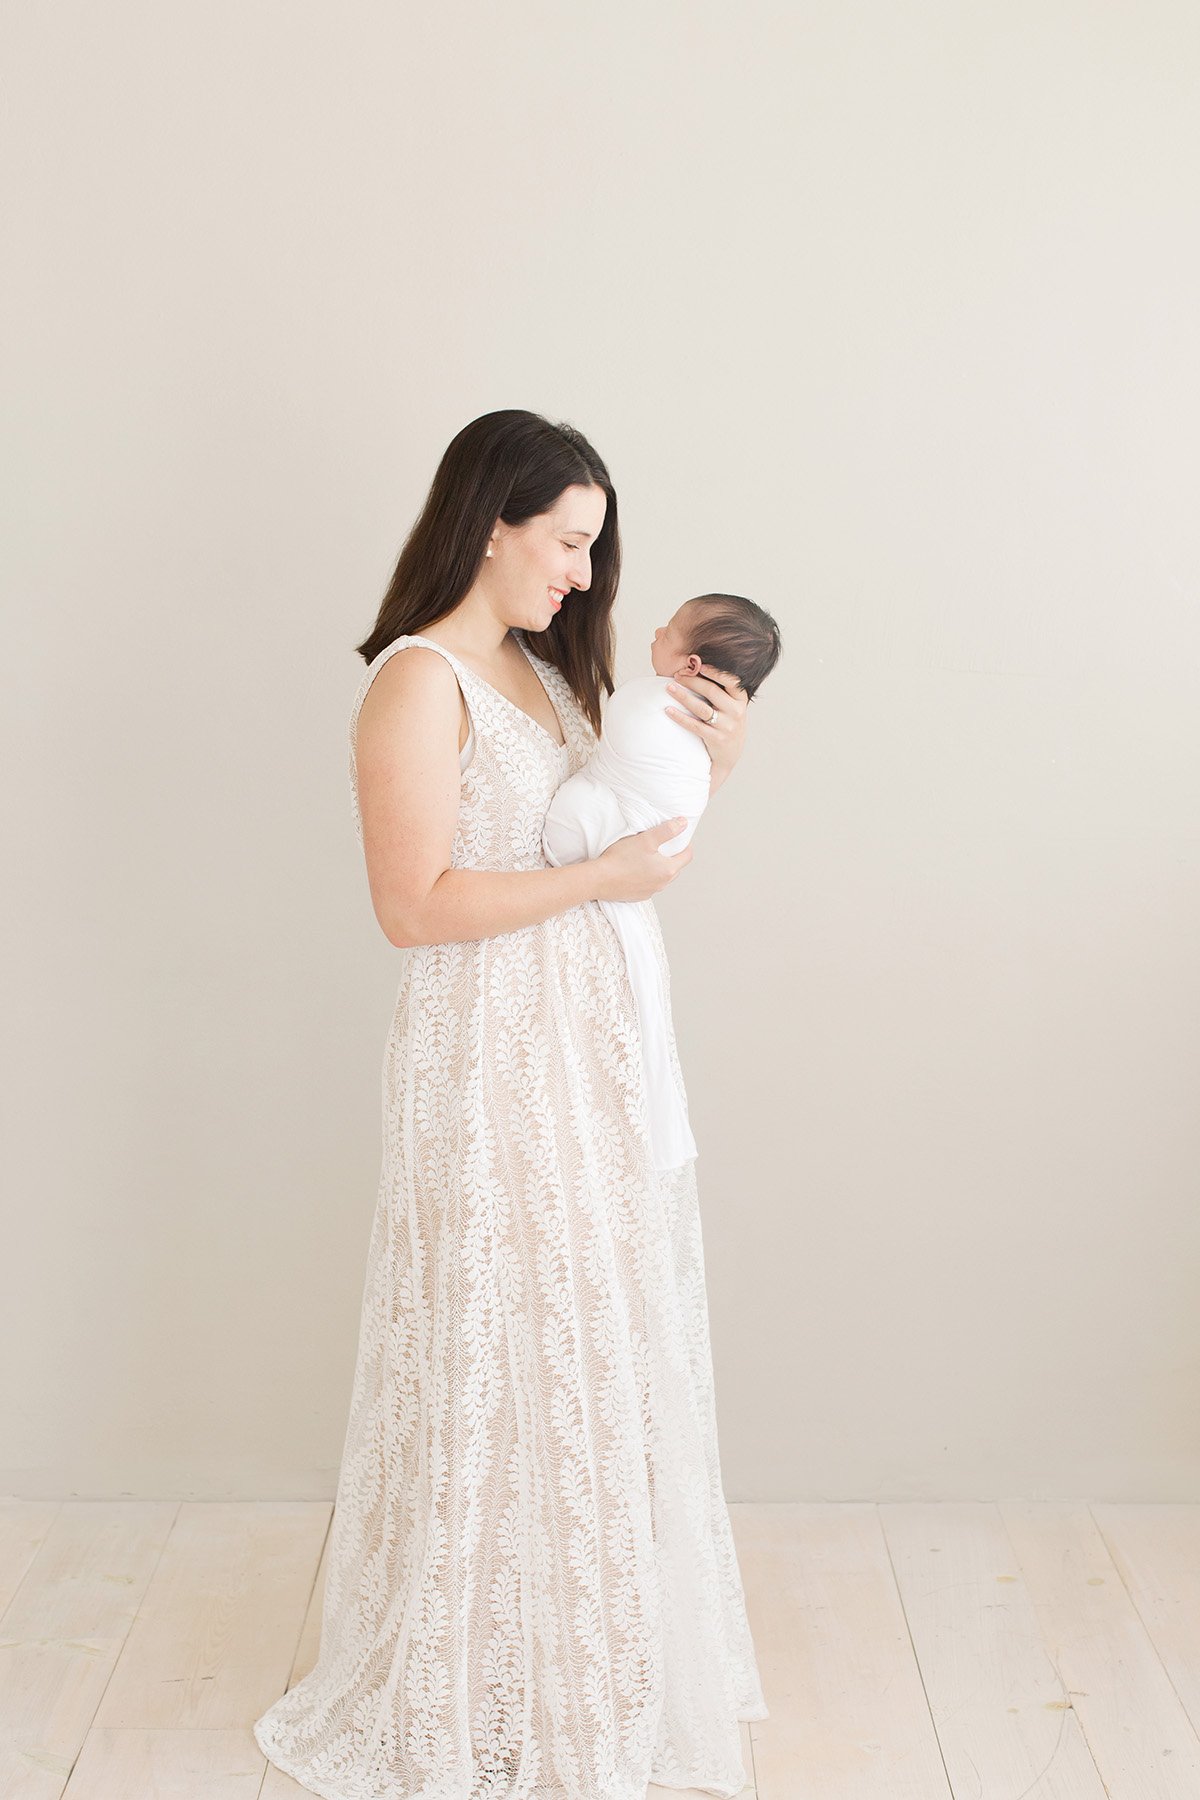 Mom wears white lace dress while holding newborn baby at Louisville Ky photography studio